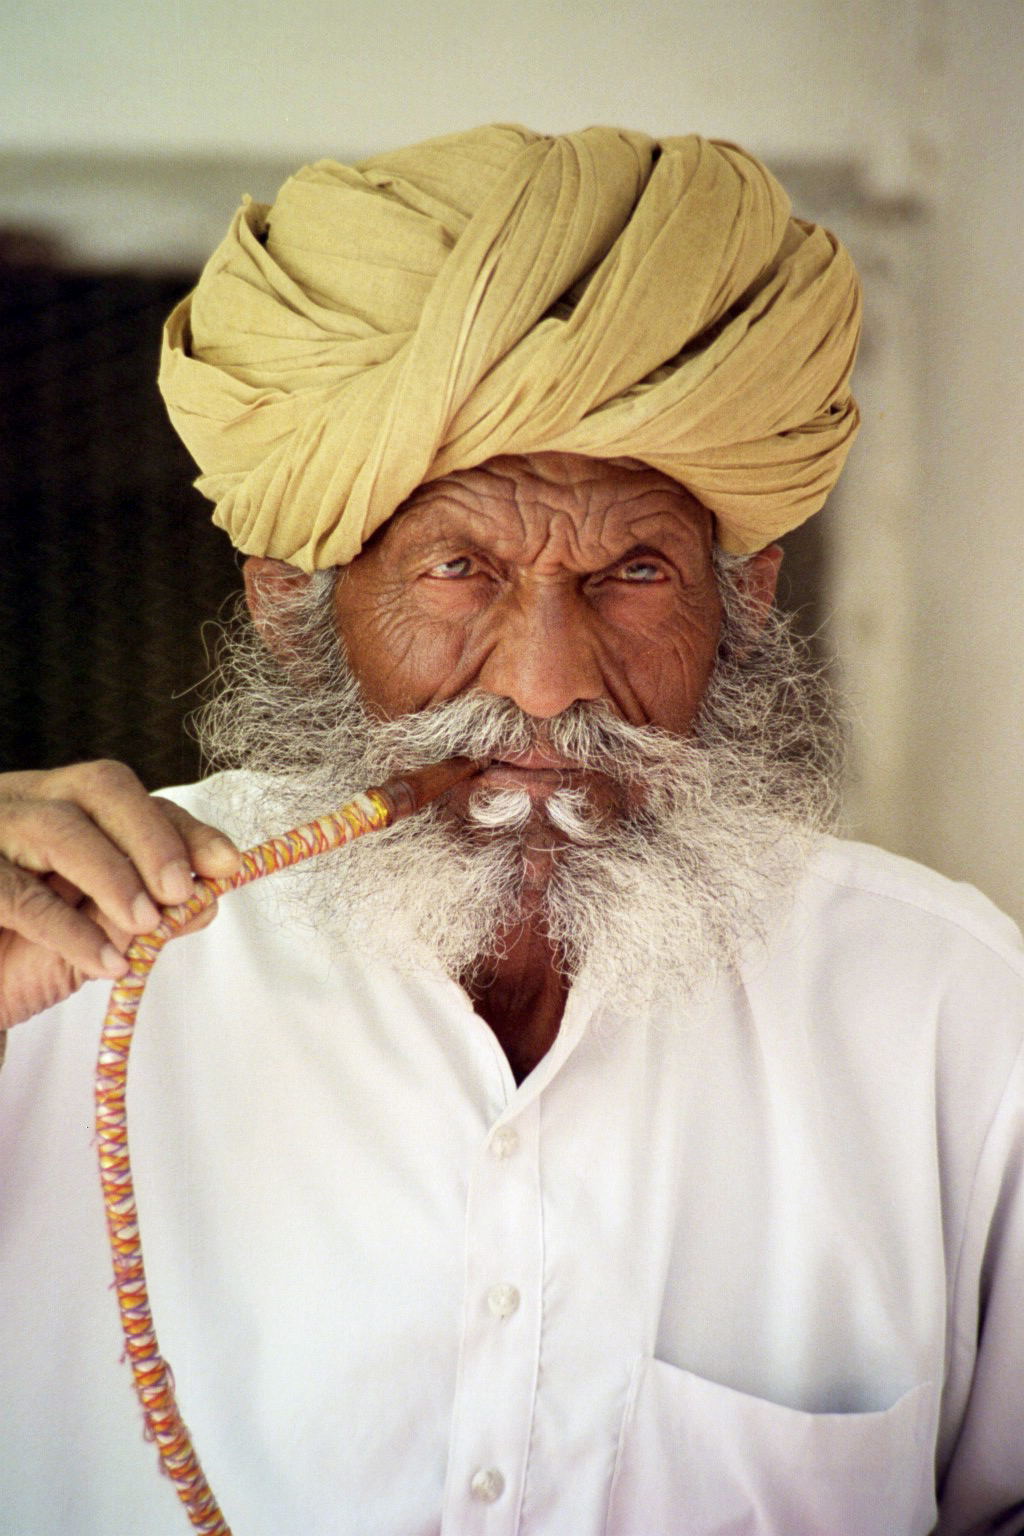 a man with a long grey beard is dressed in yellow turban and talks on a phone